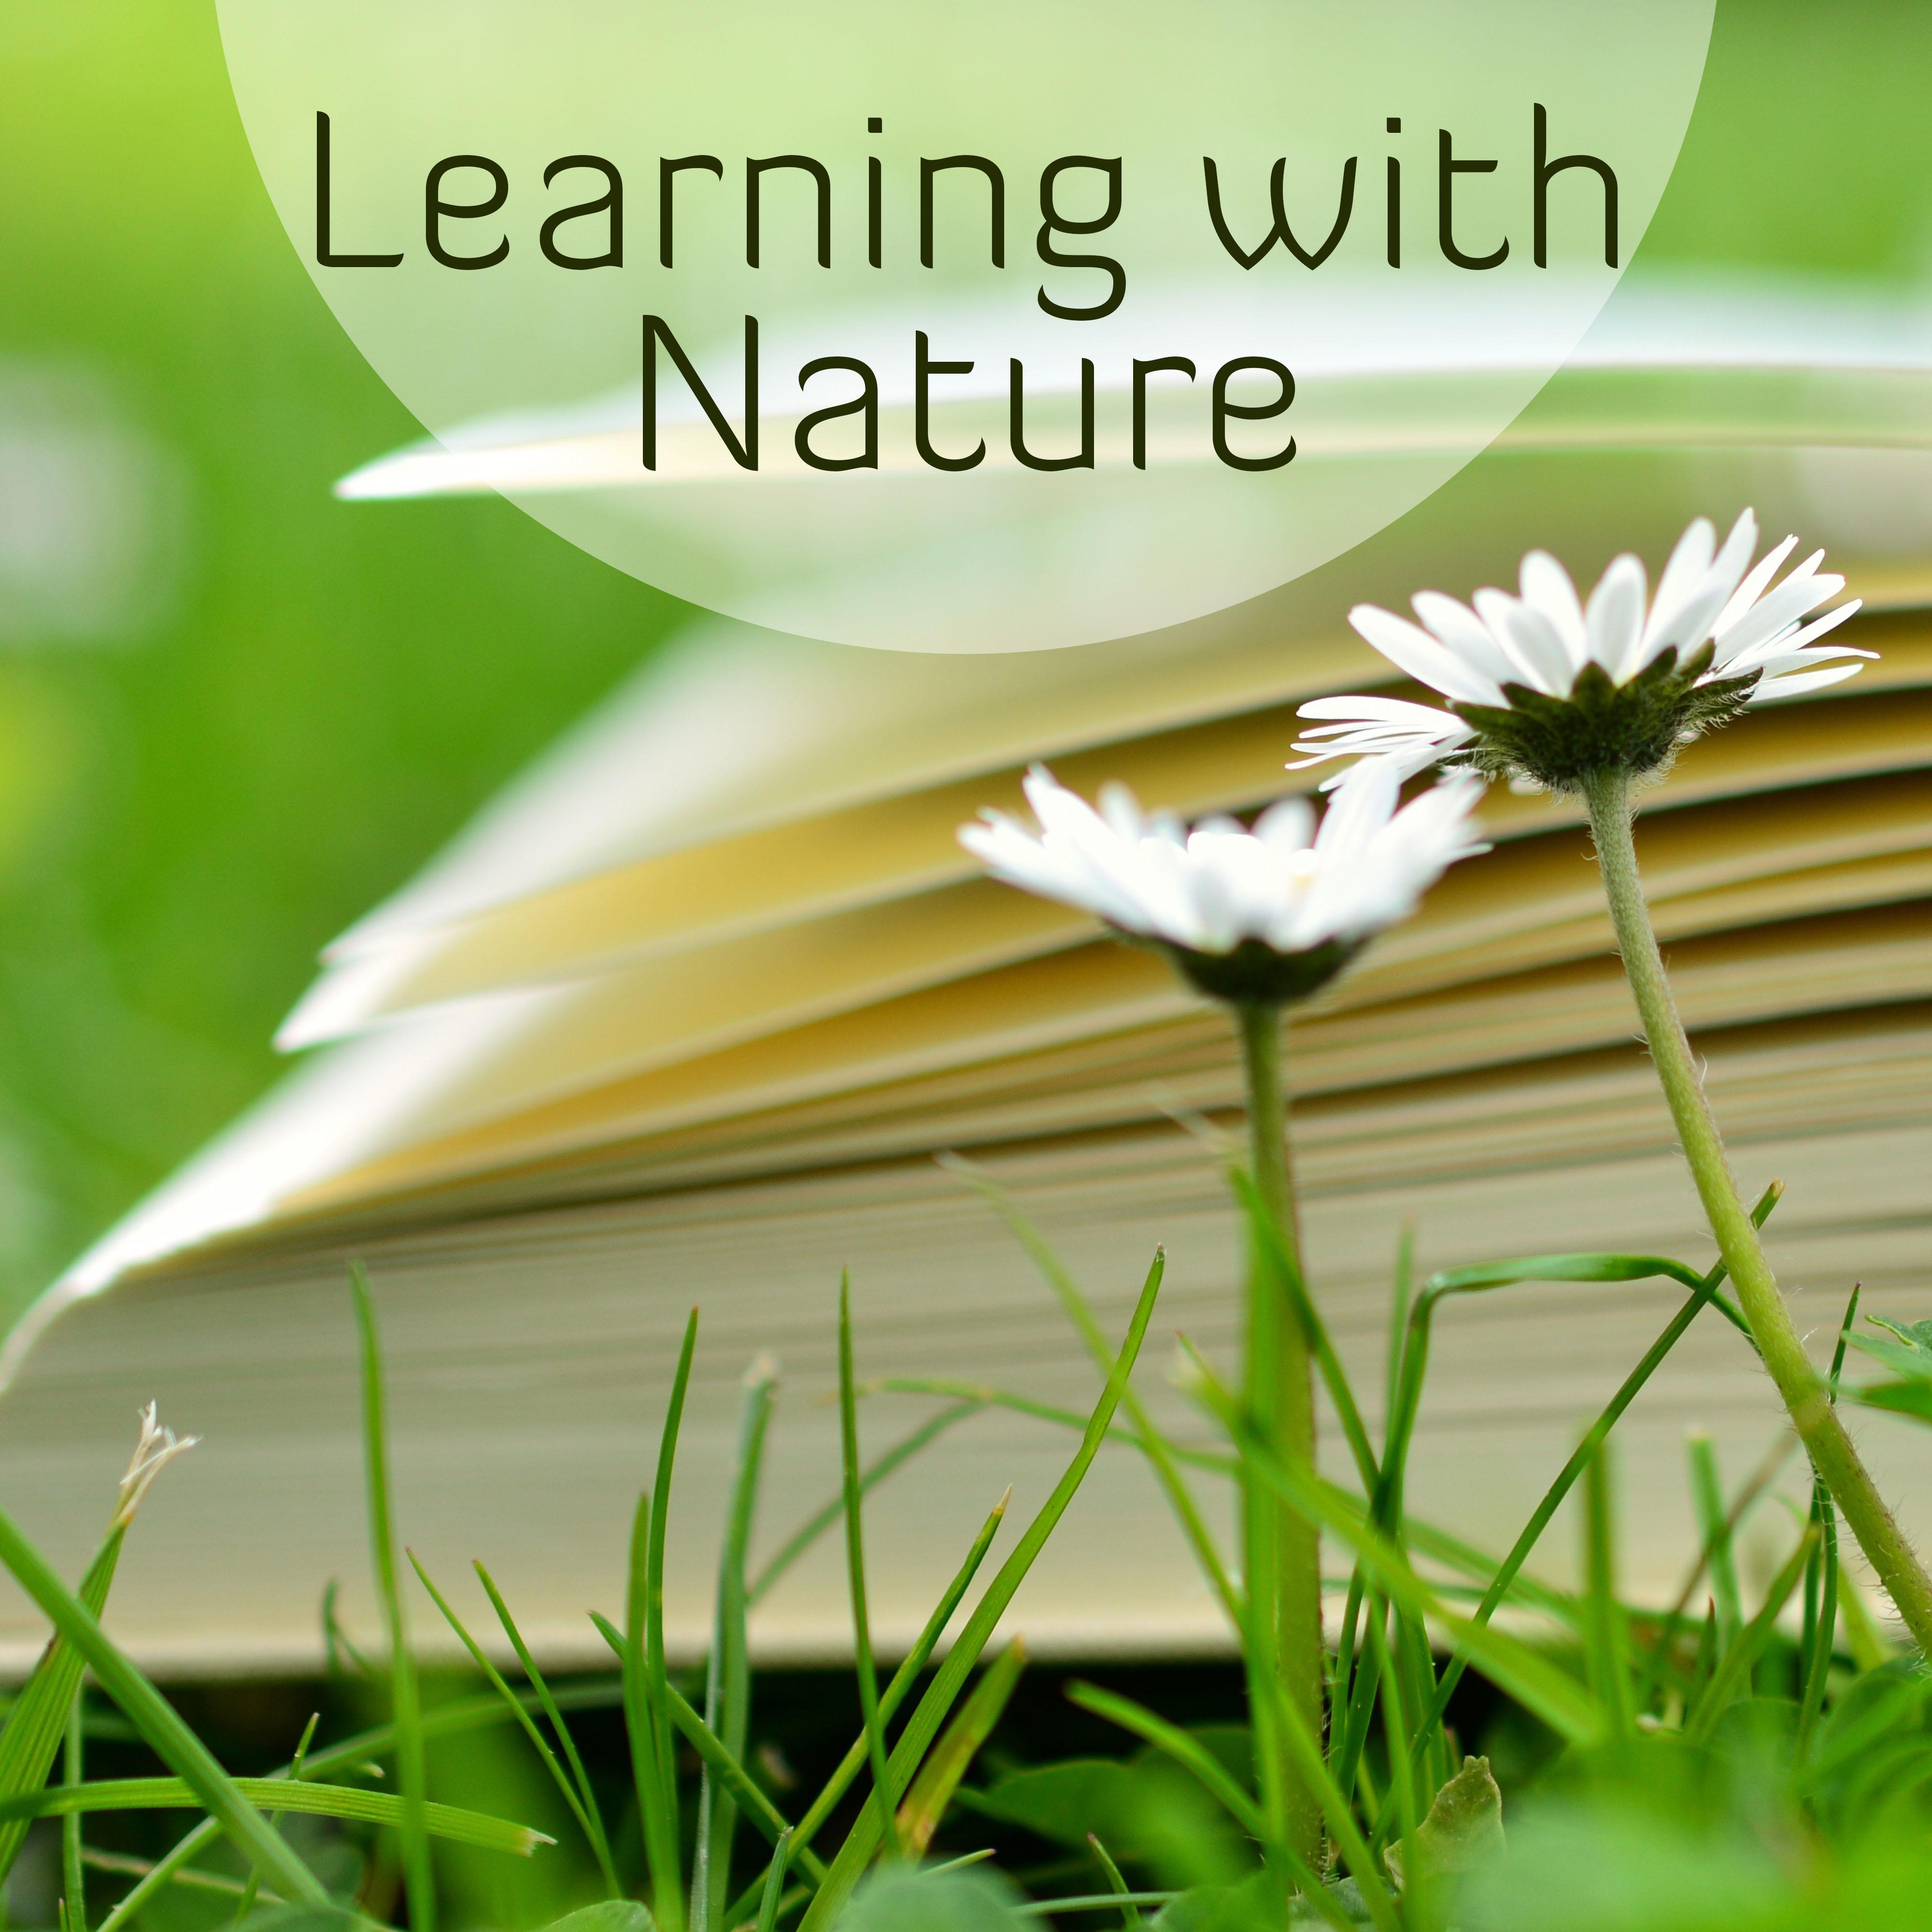 Learning with Nature  Better Memory, Deep Concentration, Study Music, Peaceful Music, Stress Relief, Brain Power, Soft Nature Sounds Help Pass Exam